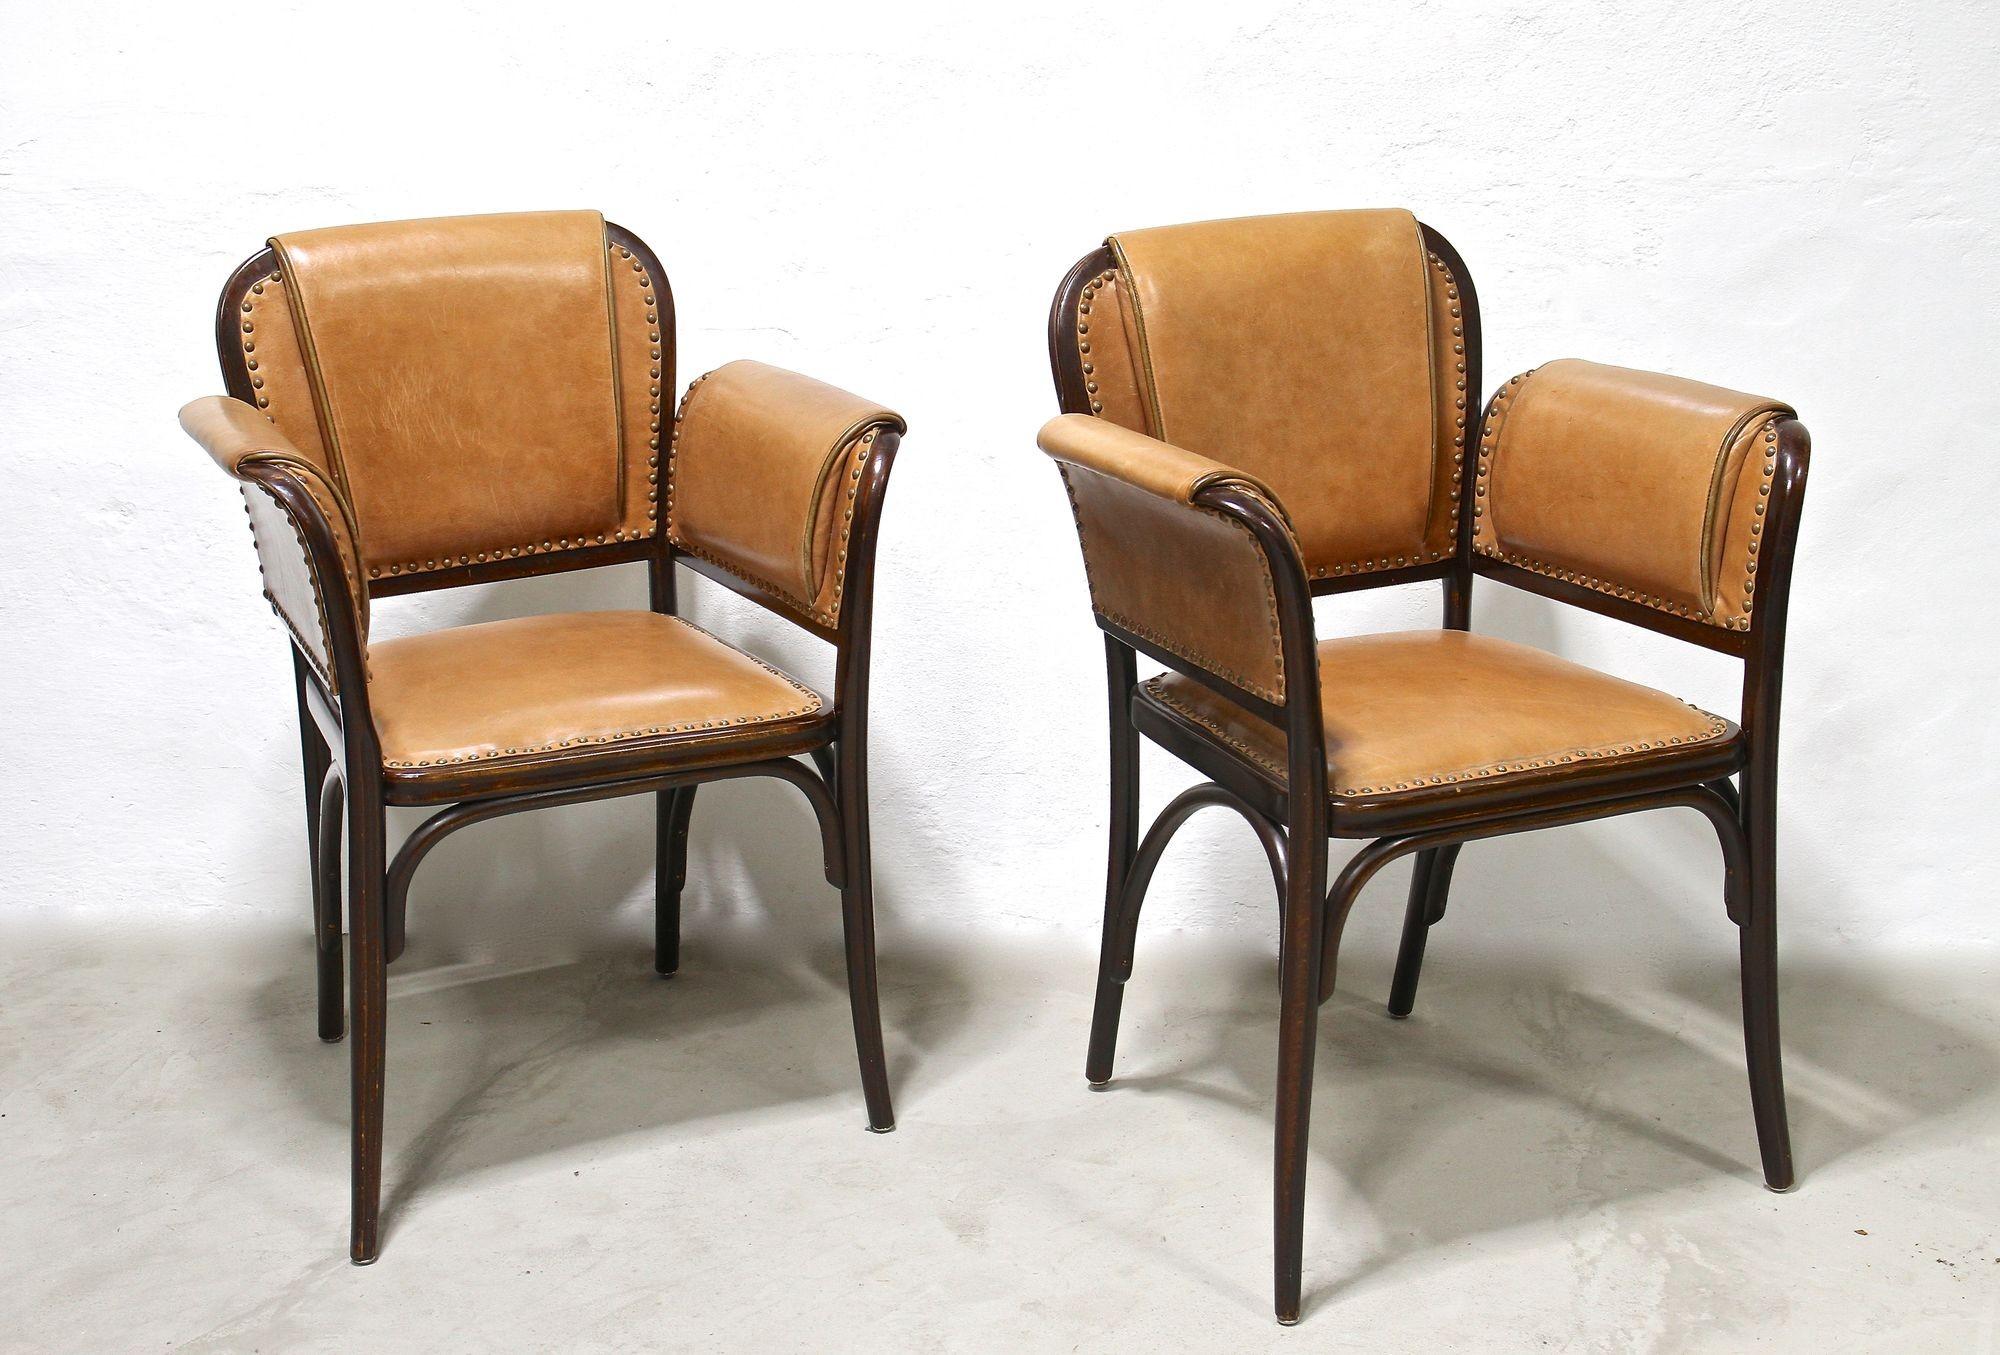 Pair of 20th Century Art Nouveau Bentwood Armchairs by Thonet, Austria, Ca. 1904 For Sale 8